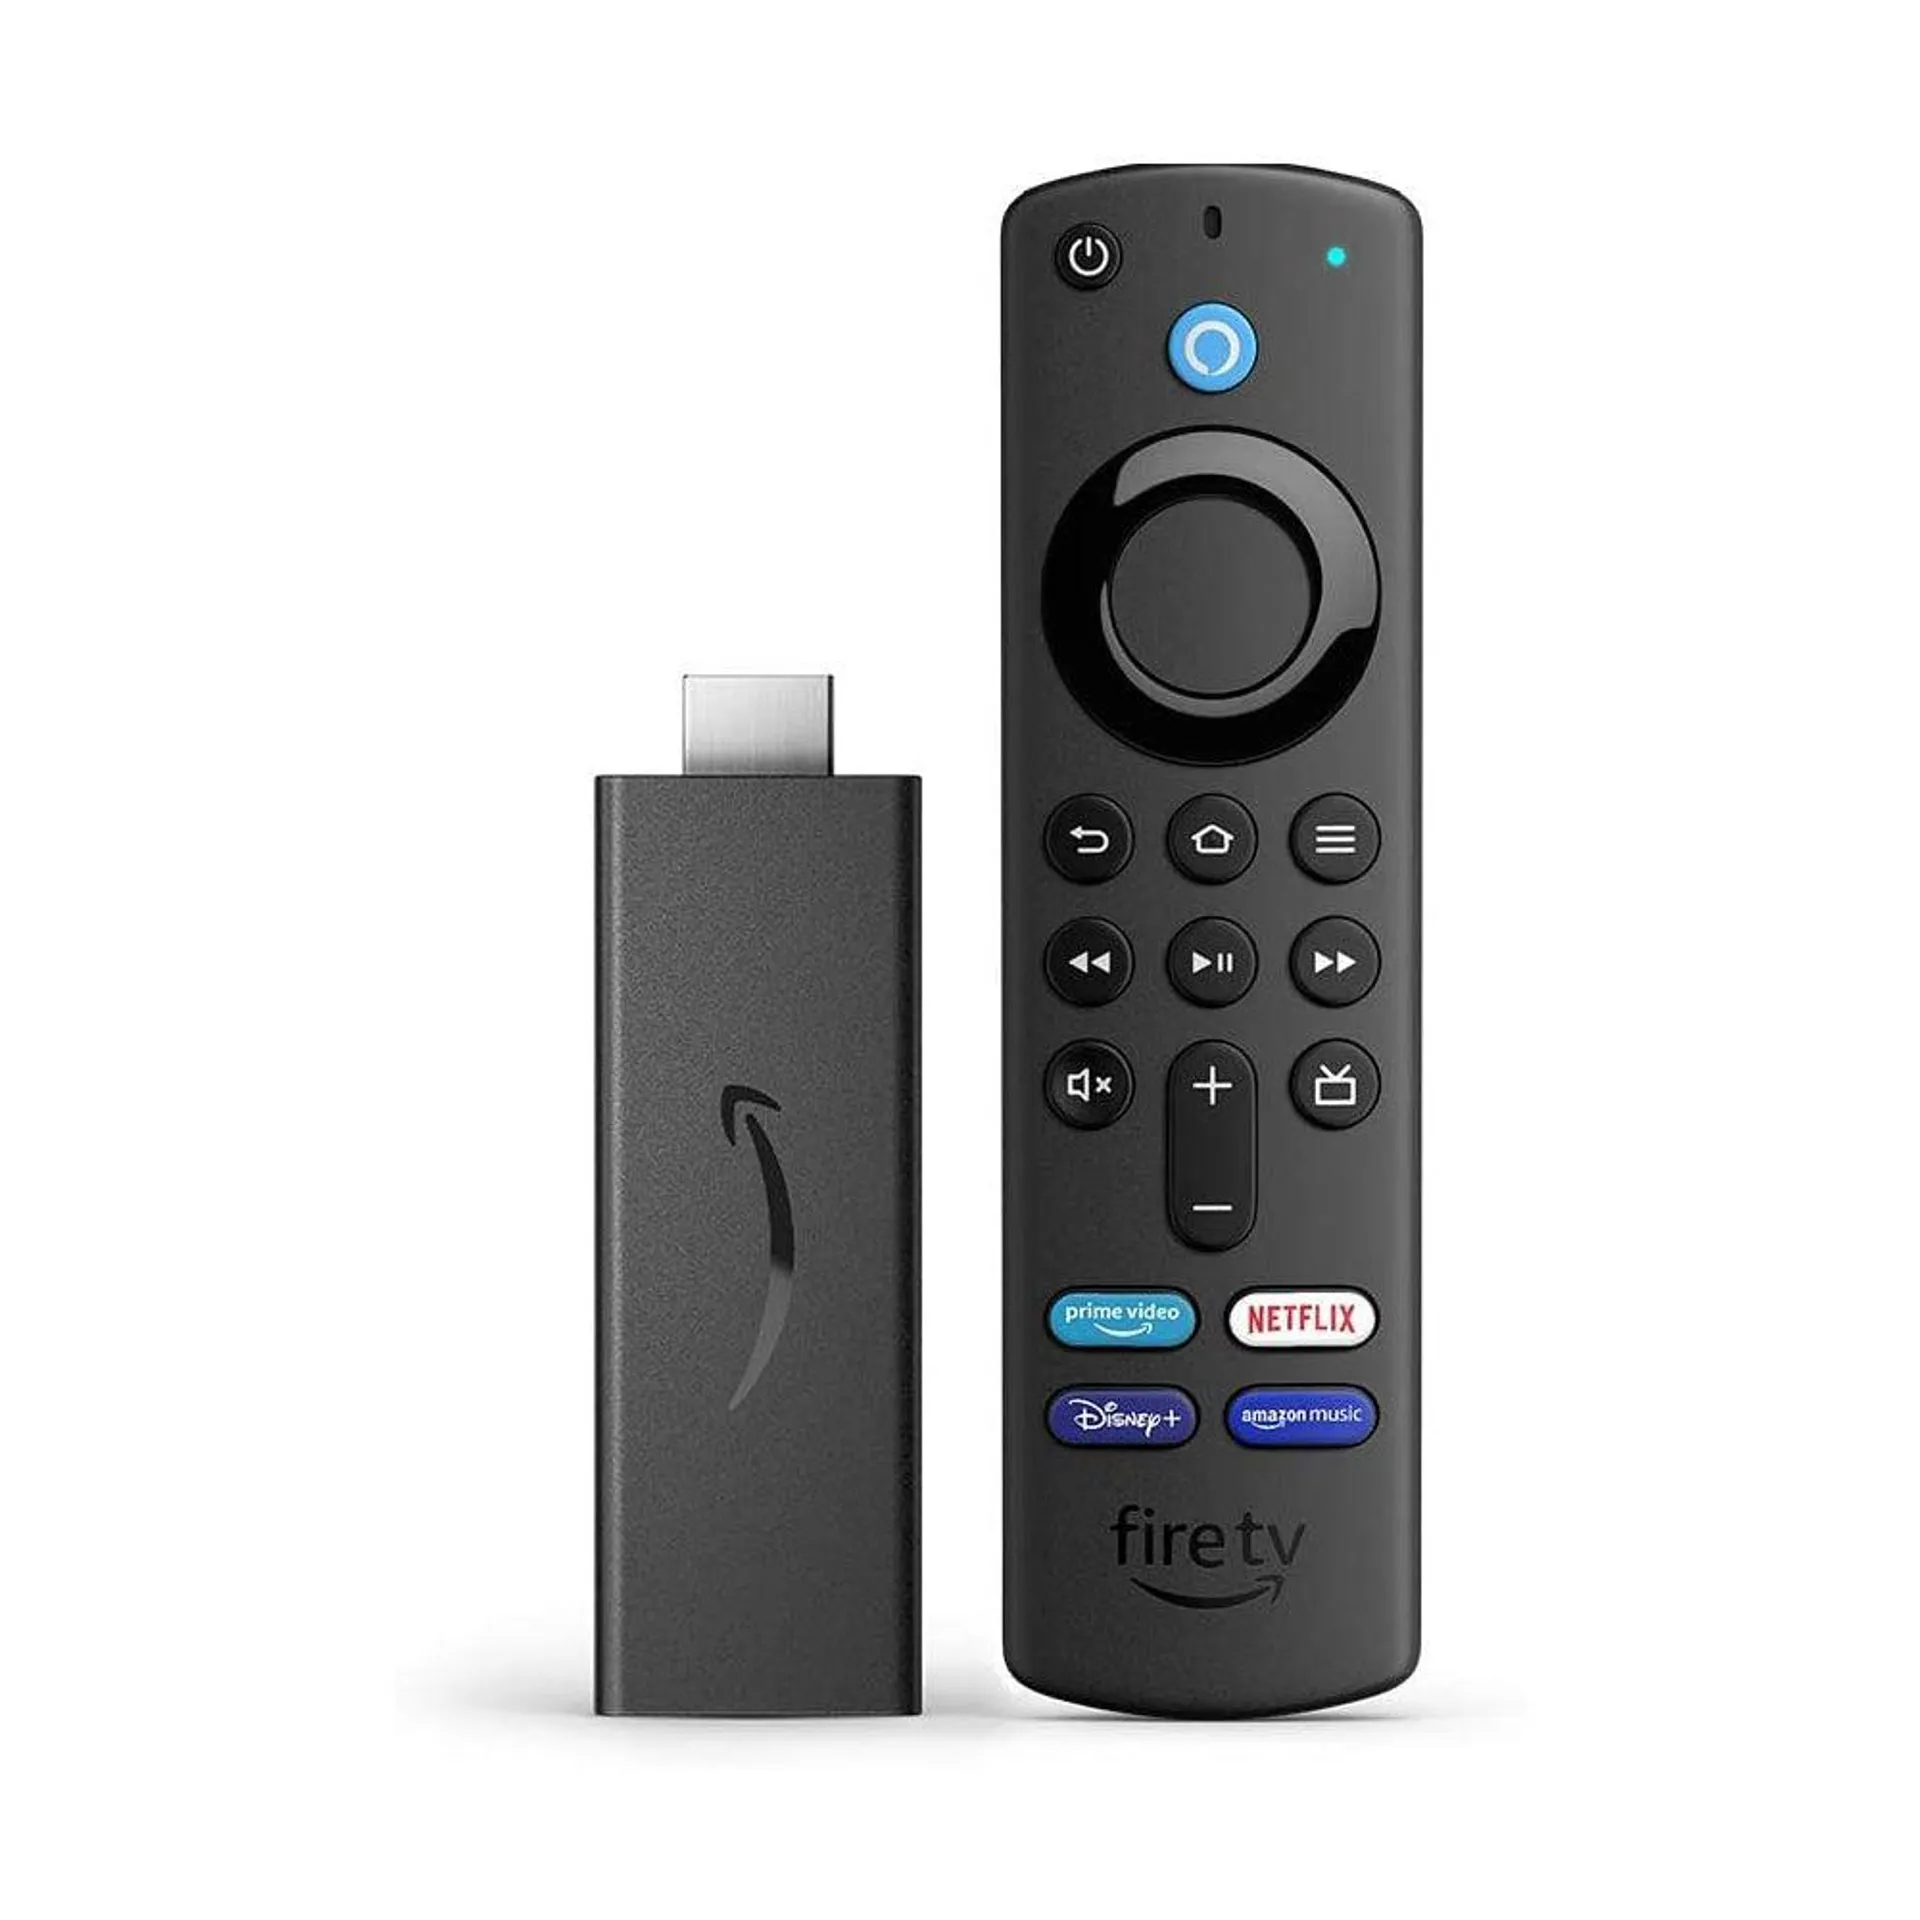 Amazon Fire TV Stick (3rd Gen) with Alexa Voice Remote (includes TV controls)